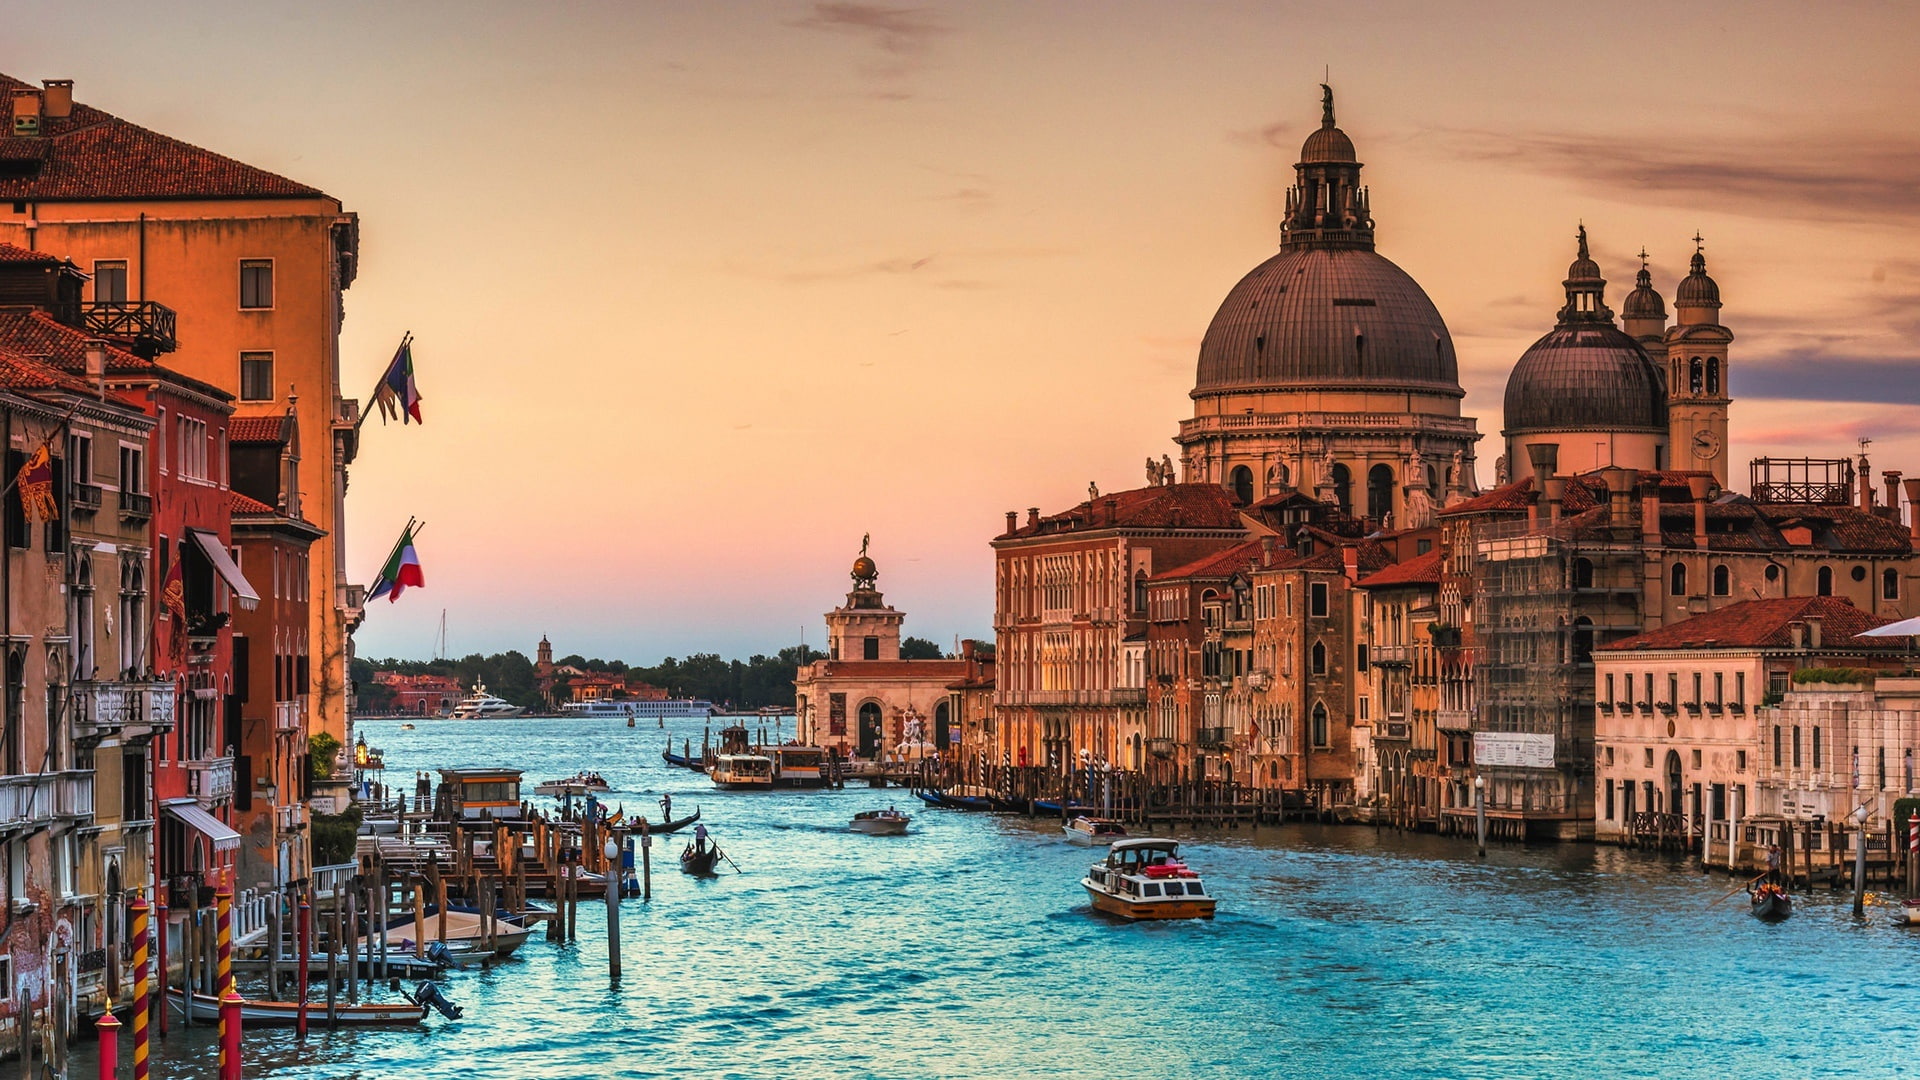 venice, italy, canal, grand canal, sunset, europe, canal grande